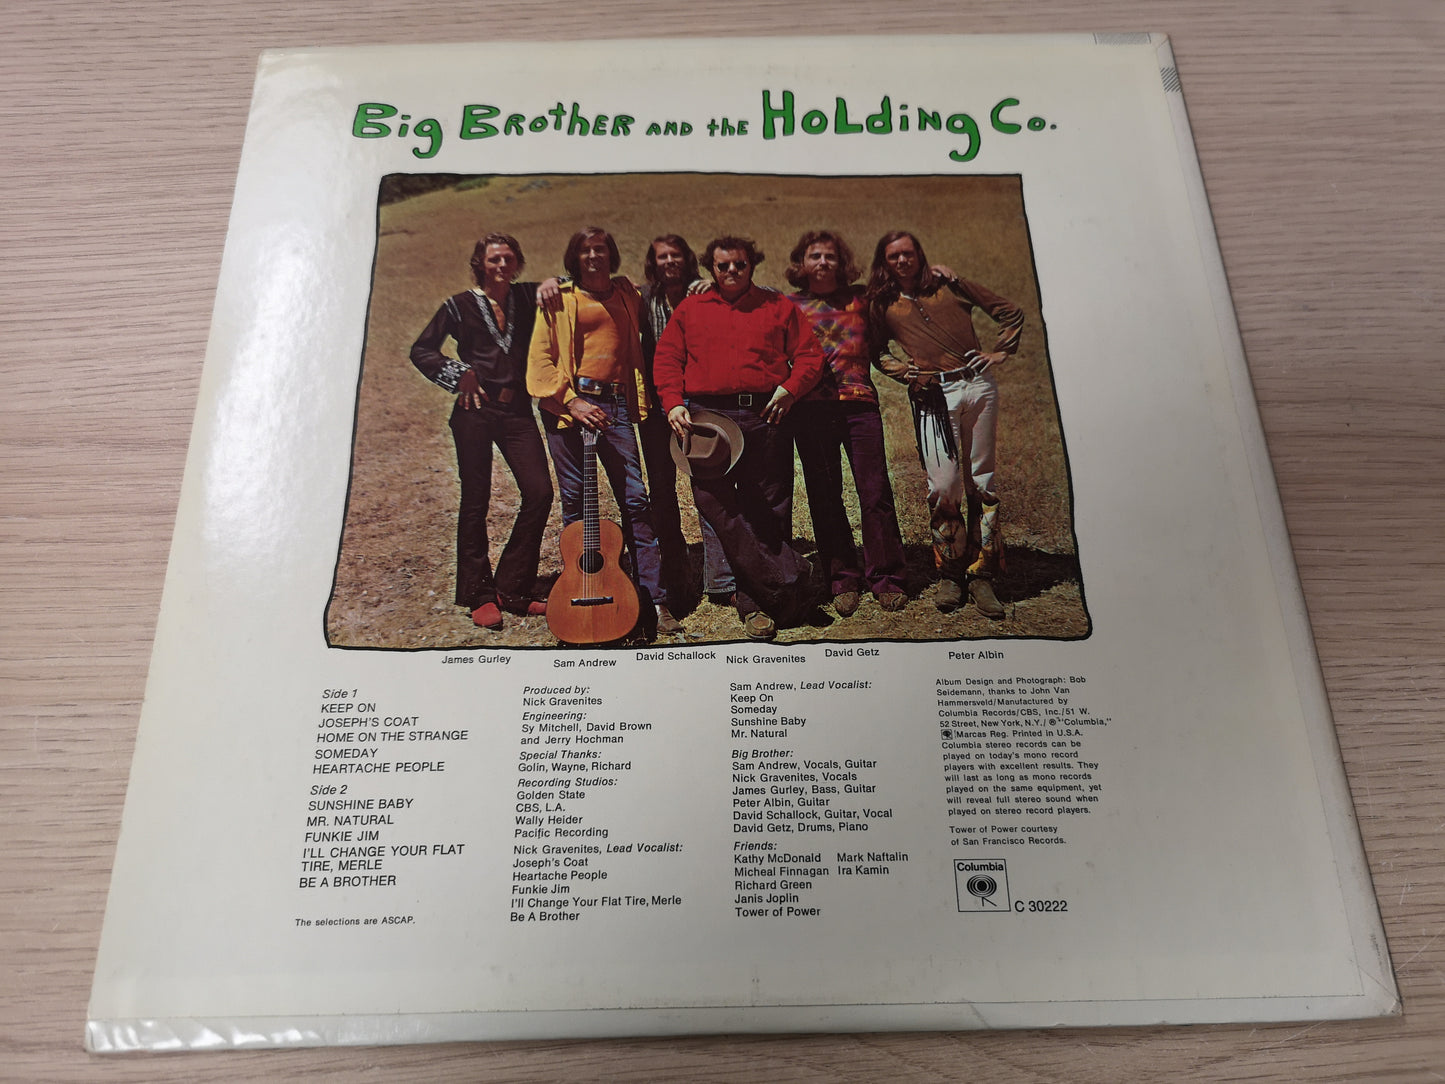 Big Brother & The Holding Co. "Be a Brother" Orig US 1970 VG++/M-